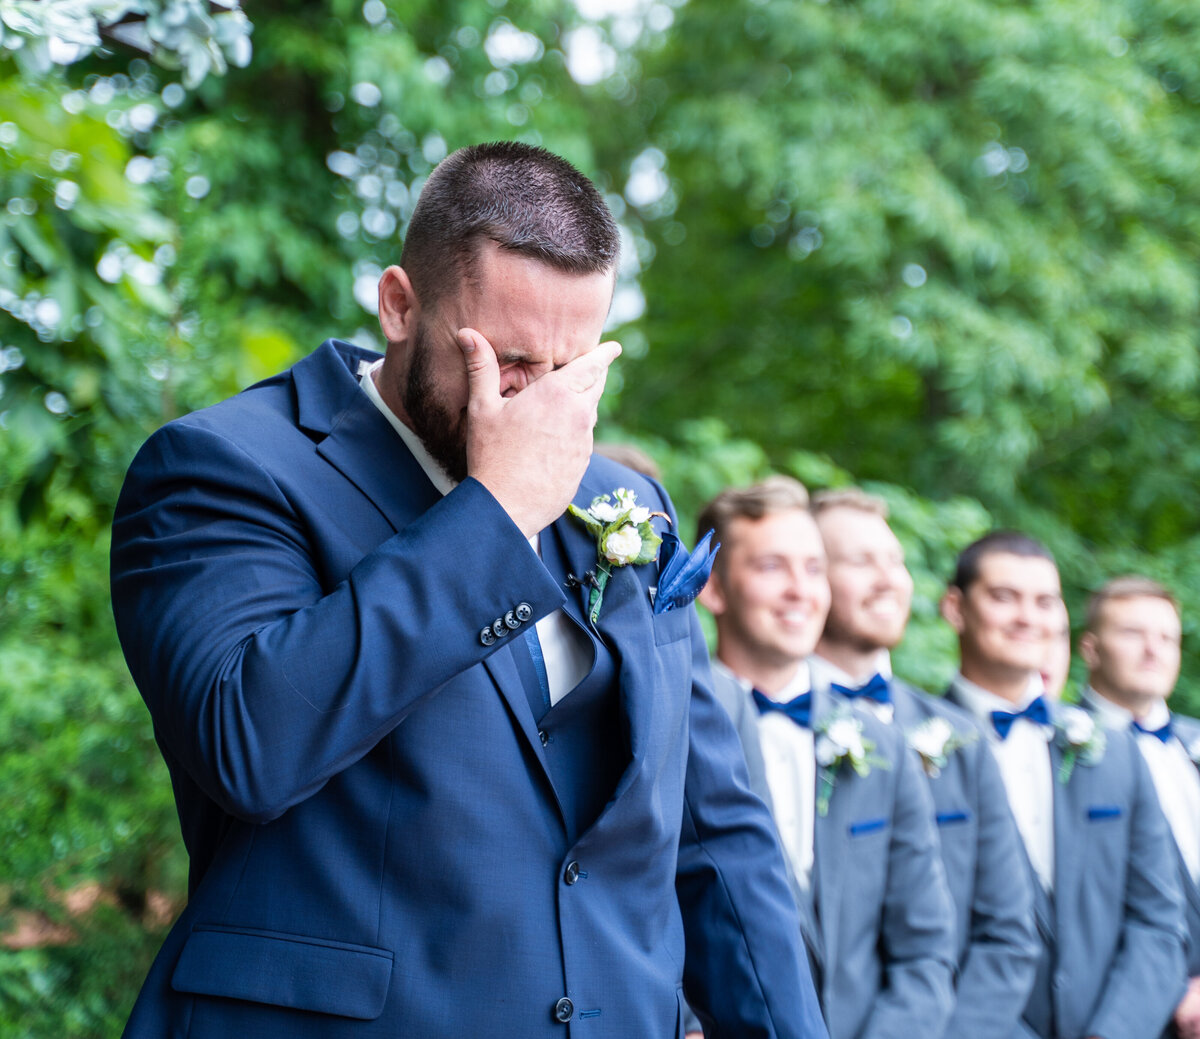 The groom, Ryan Bee, wiping away his tears after seeing his beautiful bride, Mahalie, walking down the aisle at their wedding at The Old Blue Rooster Event Center LLC in Lithopolis, Ohio.